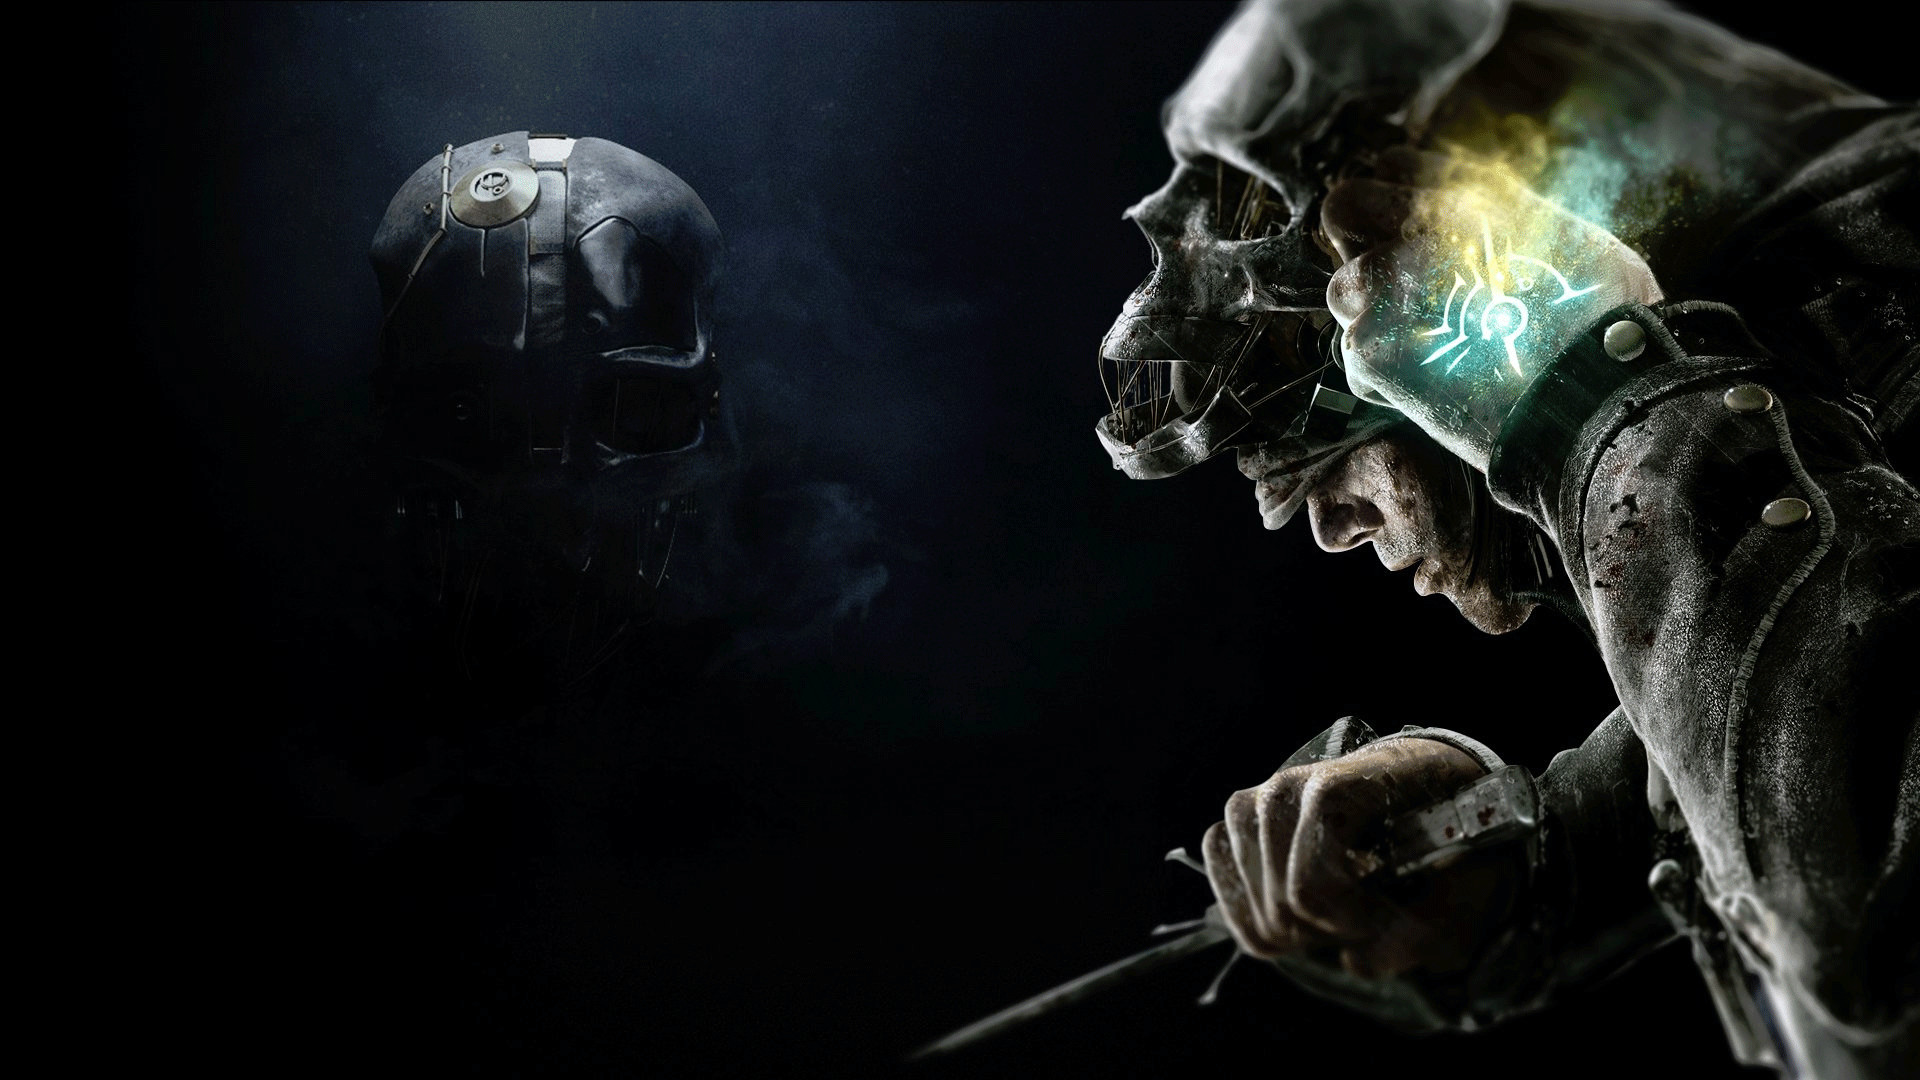 1920x1080 Dishonored Wallpaper by Arixev